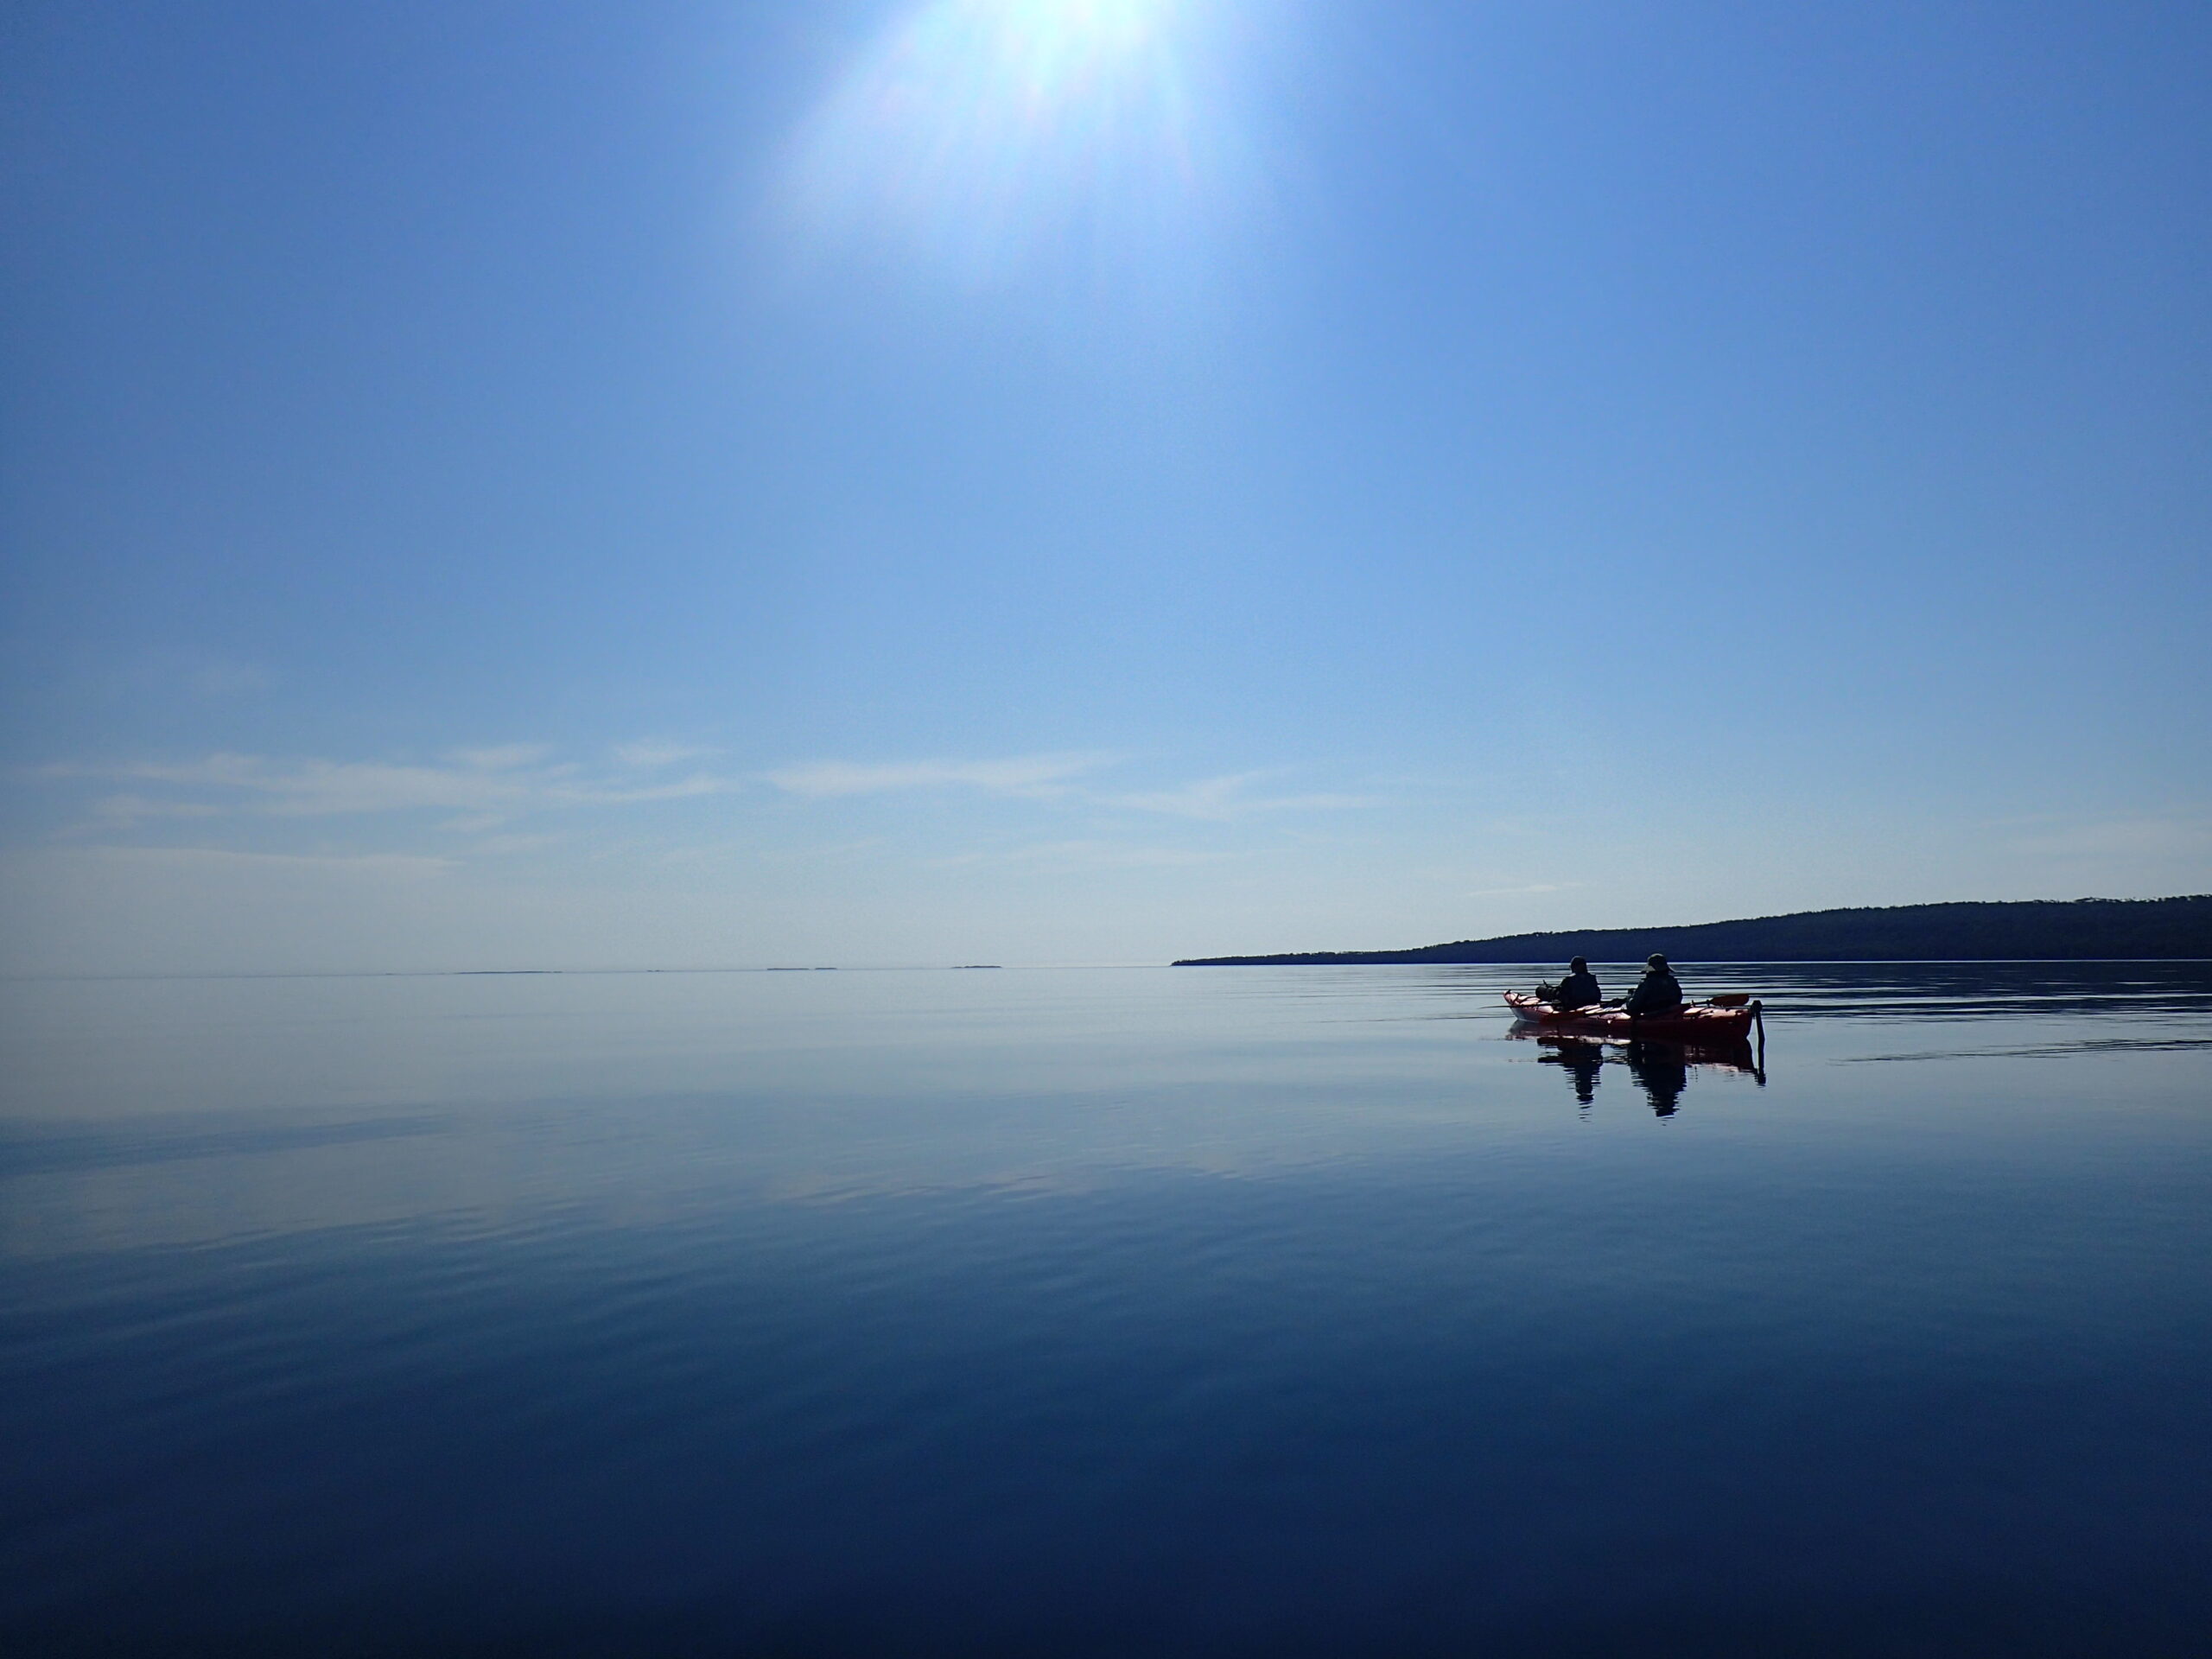 Two people in a kayak on a still body of water